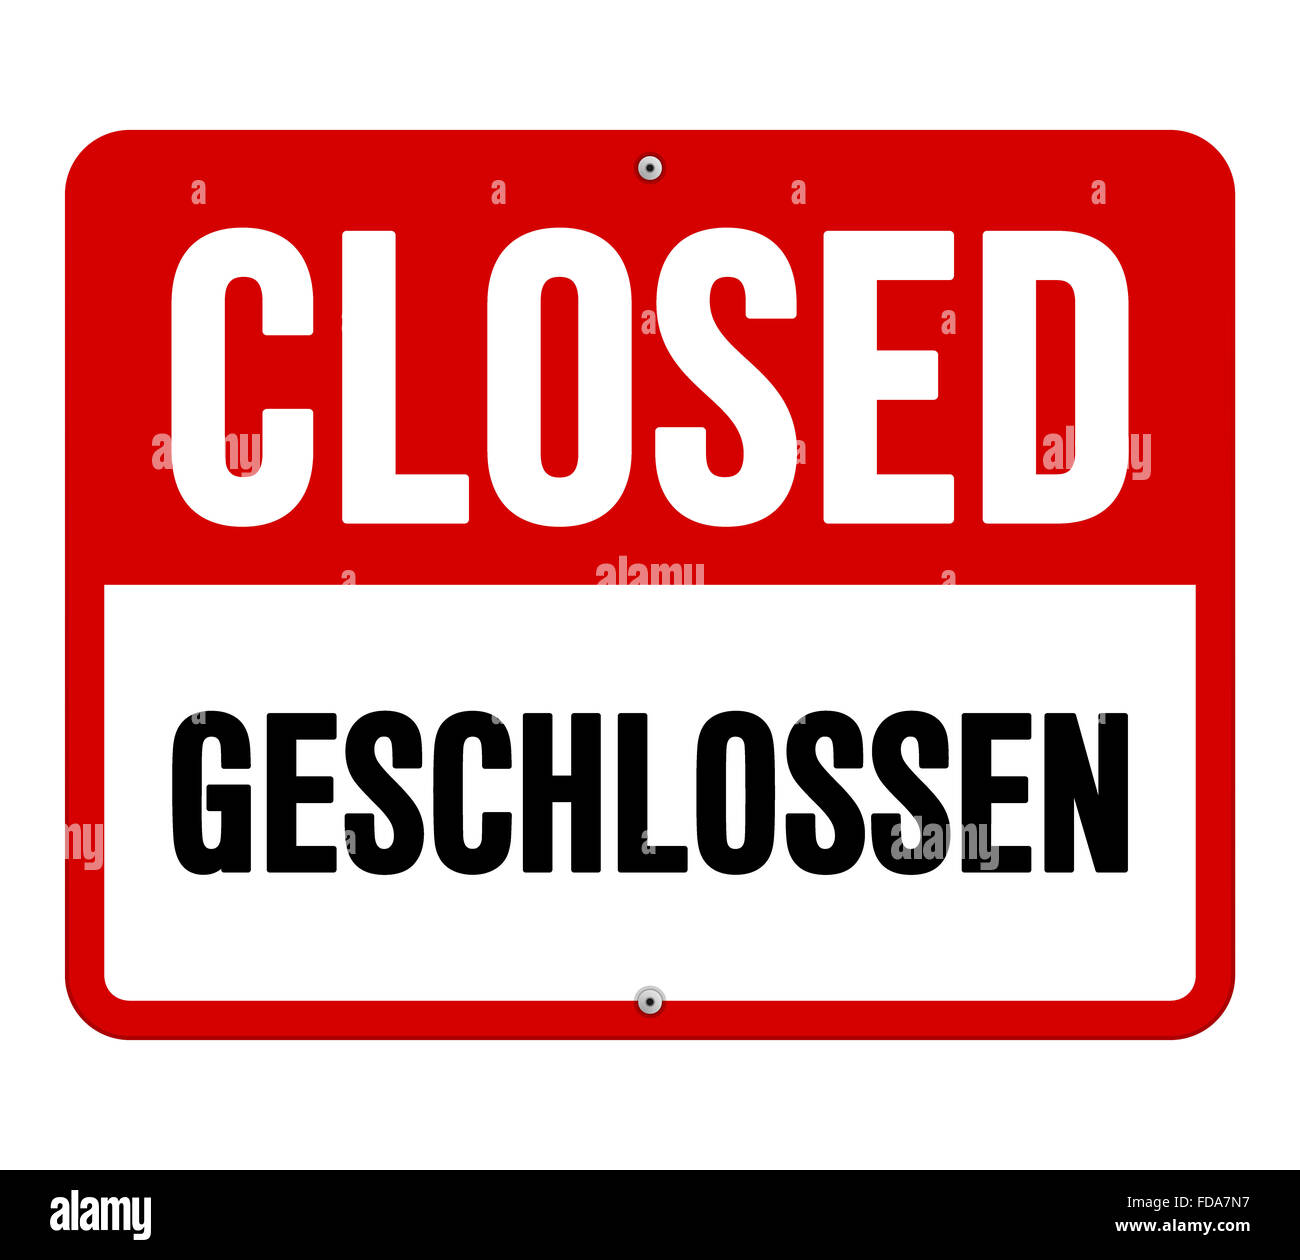 Closed geschlossen sign in white and red Stock Photo